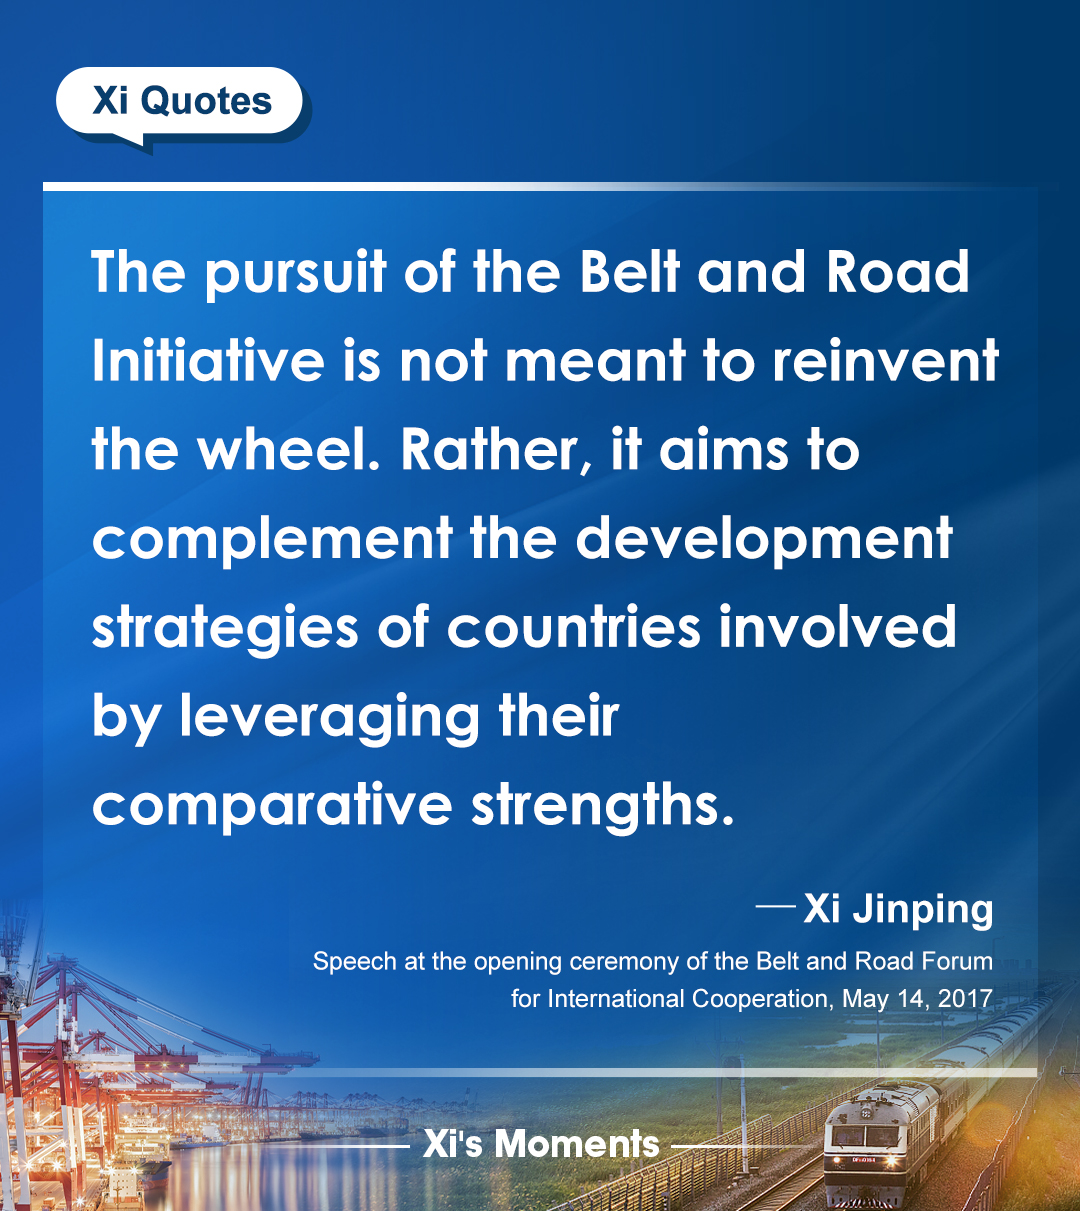 President Xi's remarks on the Belt and Road Initiative